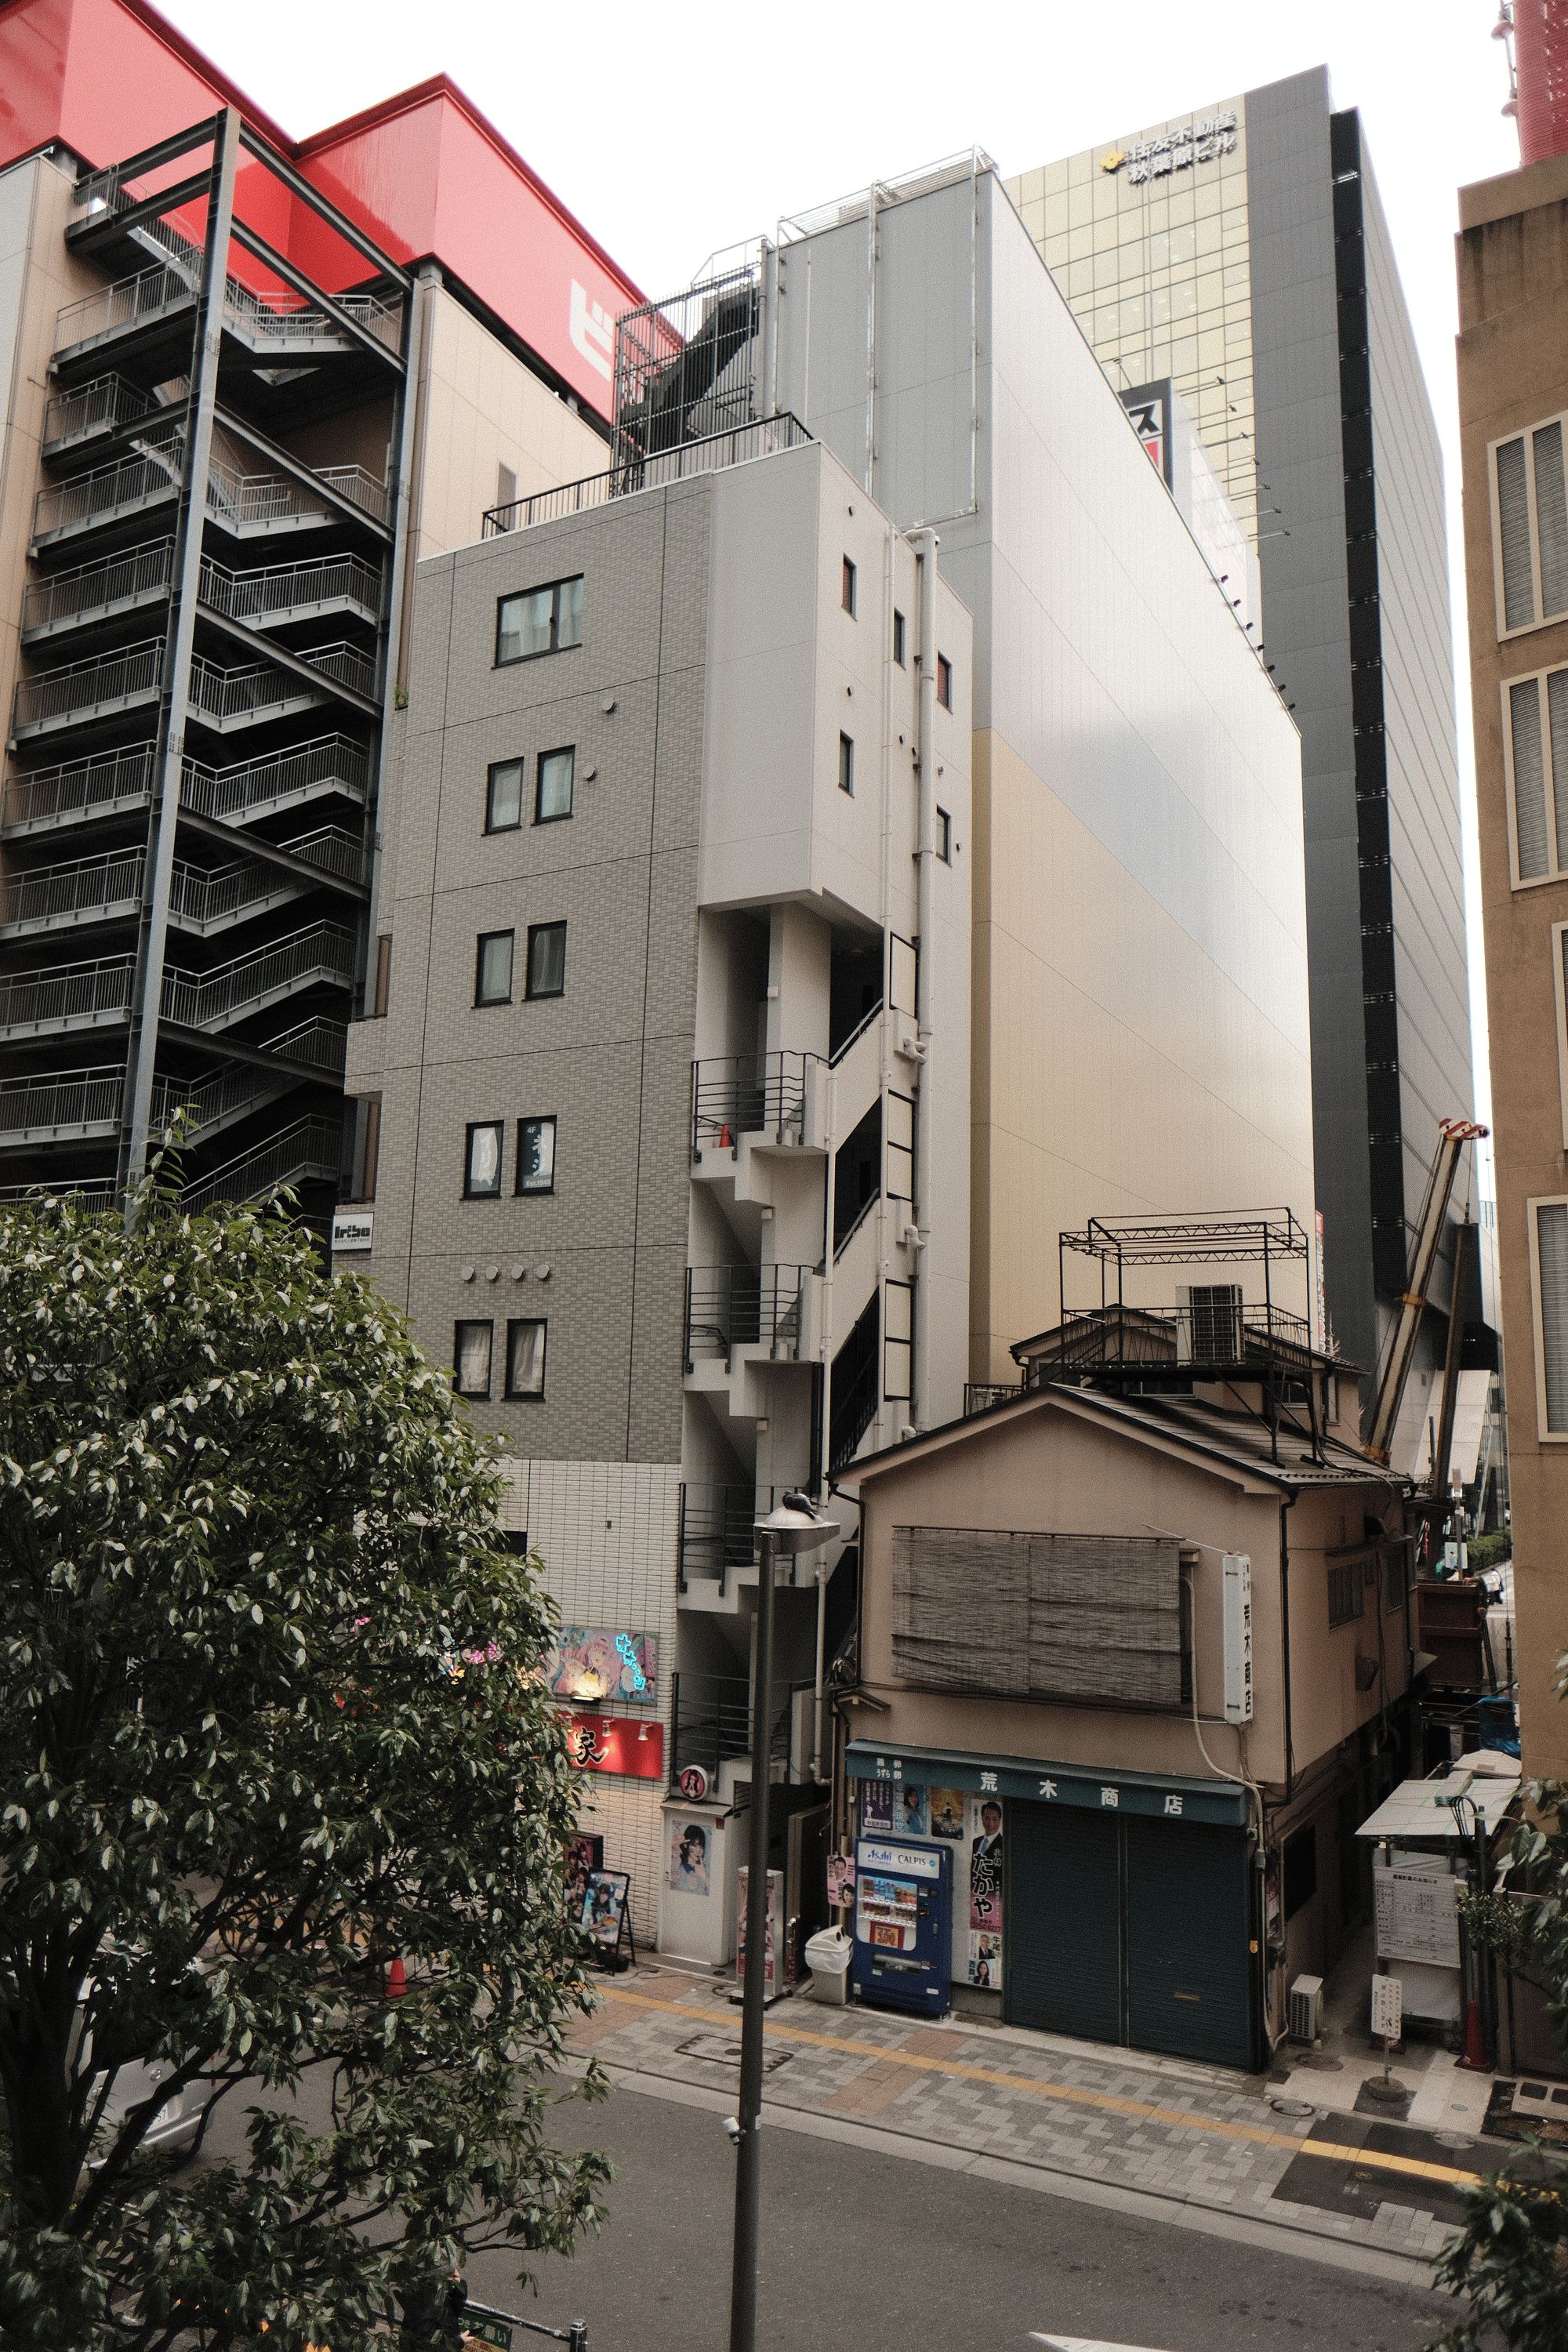 Old and squeezed Tokyo houses